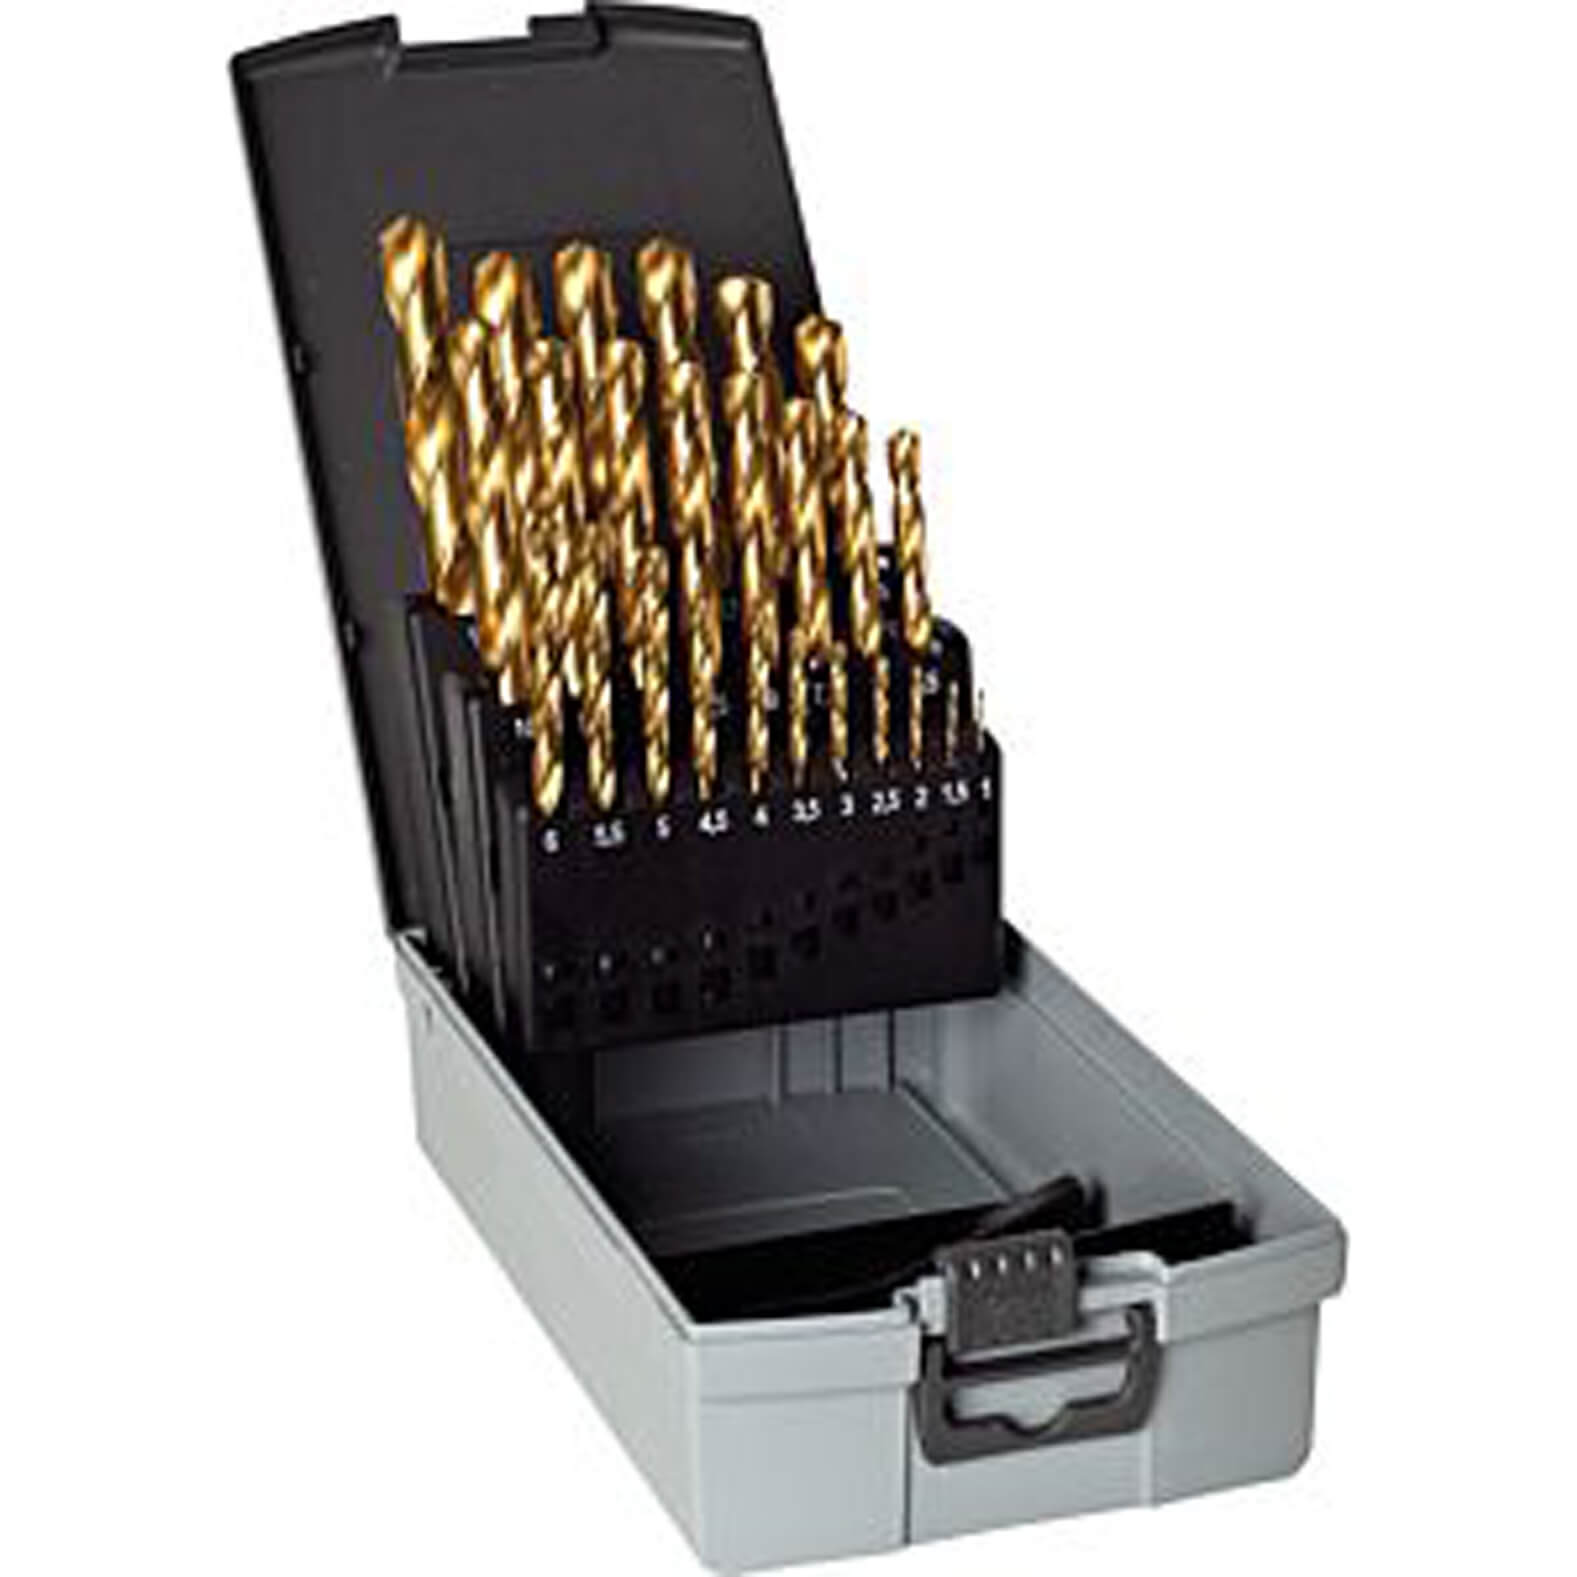 Guhring No 17 25 Piece HSS TiN Coated 1.0 -13.0mm By 0.5mm Drill Set